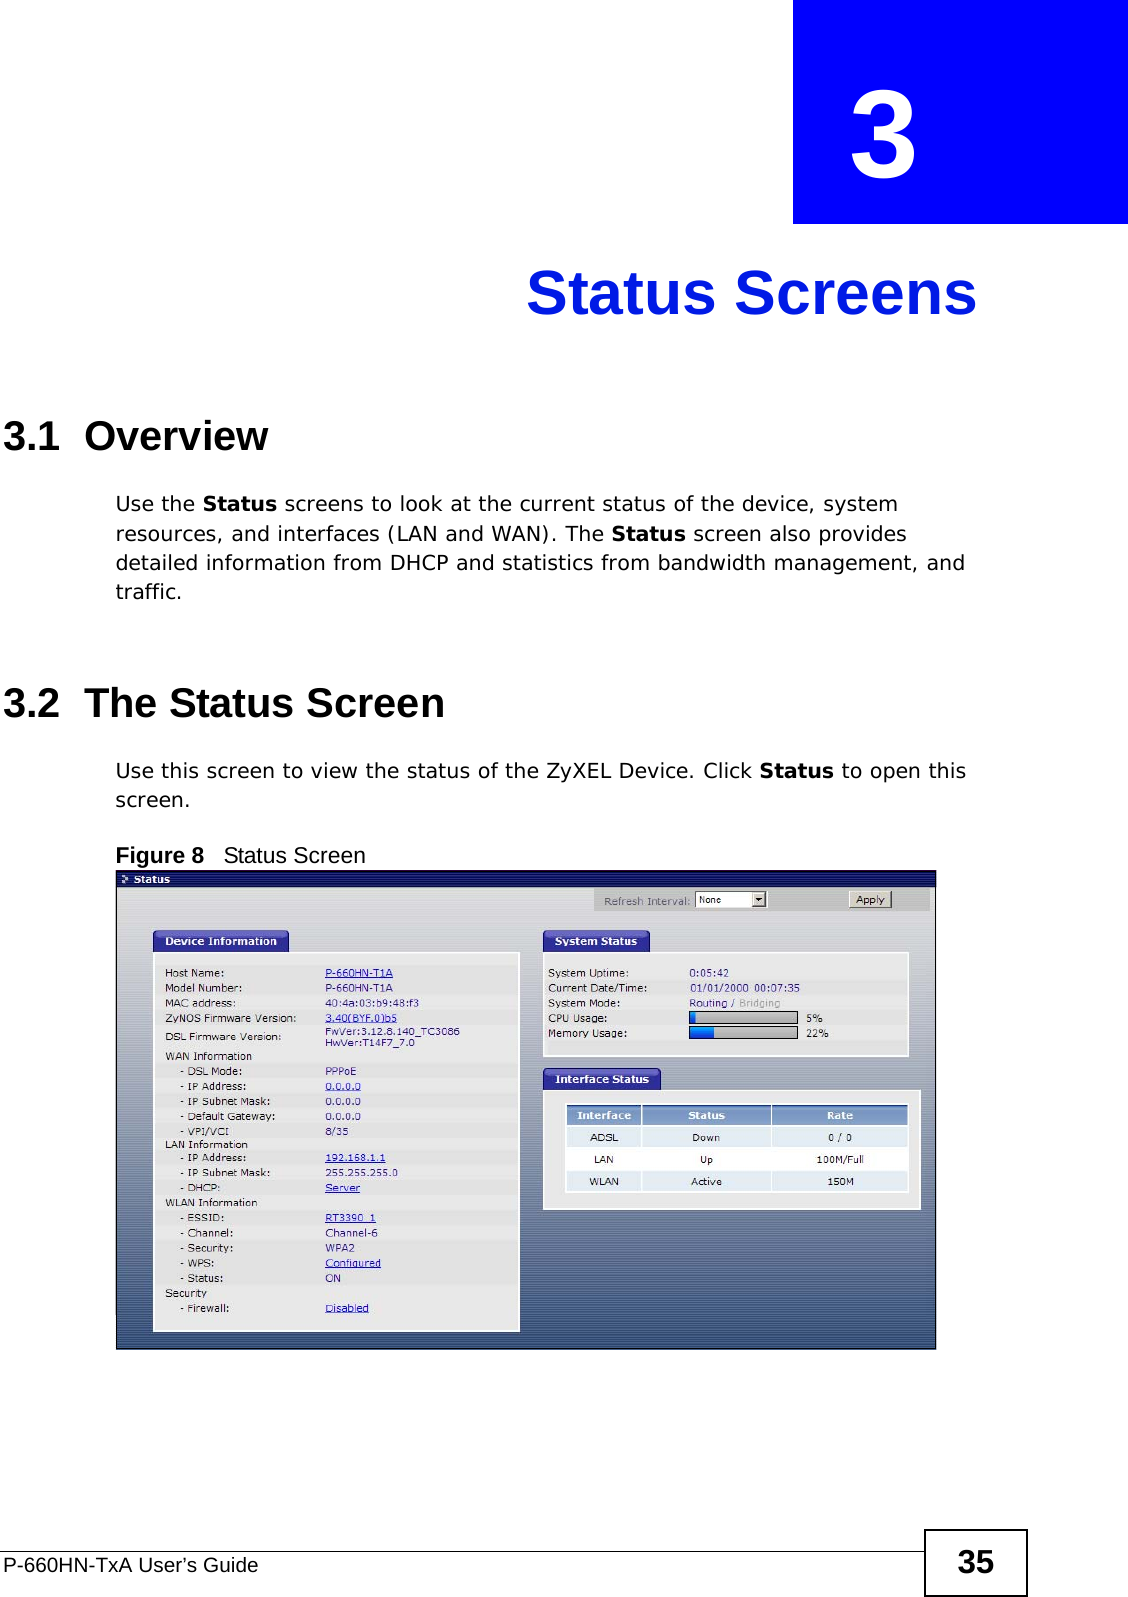 P-660HN-TxA User’s Guide 35CHAPTER  3 Status Screens3.1  OverviewUse the Status screens to look at the current status of the device, system resources, and interfaces (LAN and WAN). The Status screen also provides detailed information from DHCP and statistics from bandwidth management, and traffic.3.2  The Status Screen Use this screen to view the status of the ZyXEL Device. Click Status to open this screen.Figure 8   Status Screen